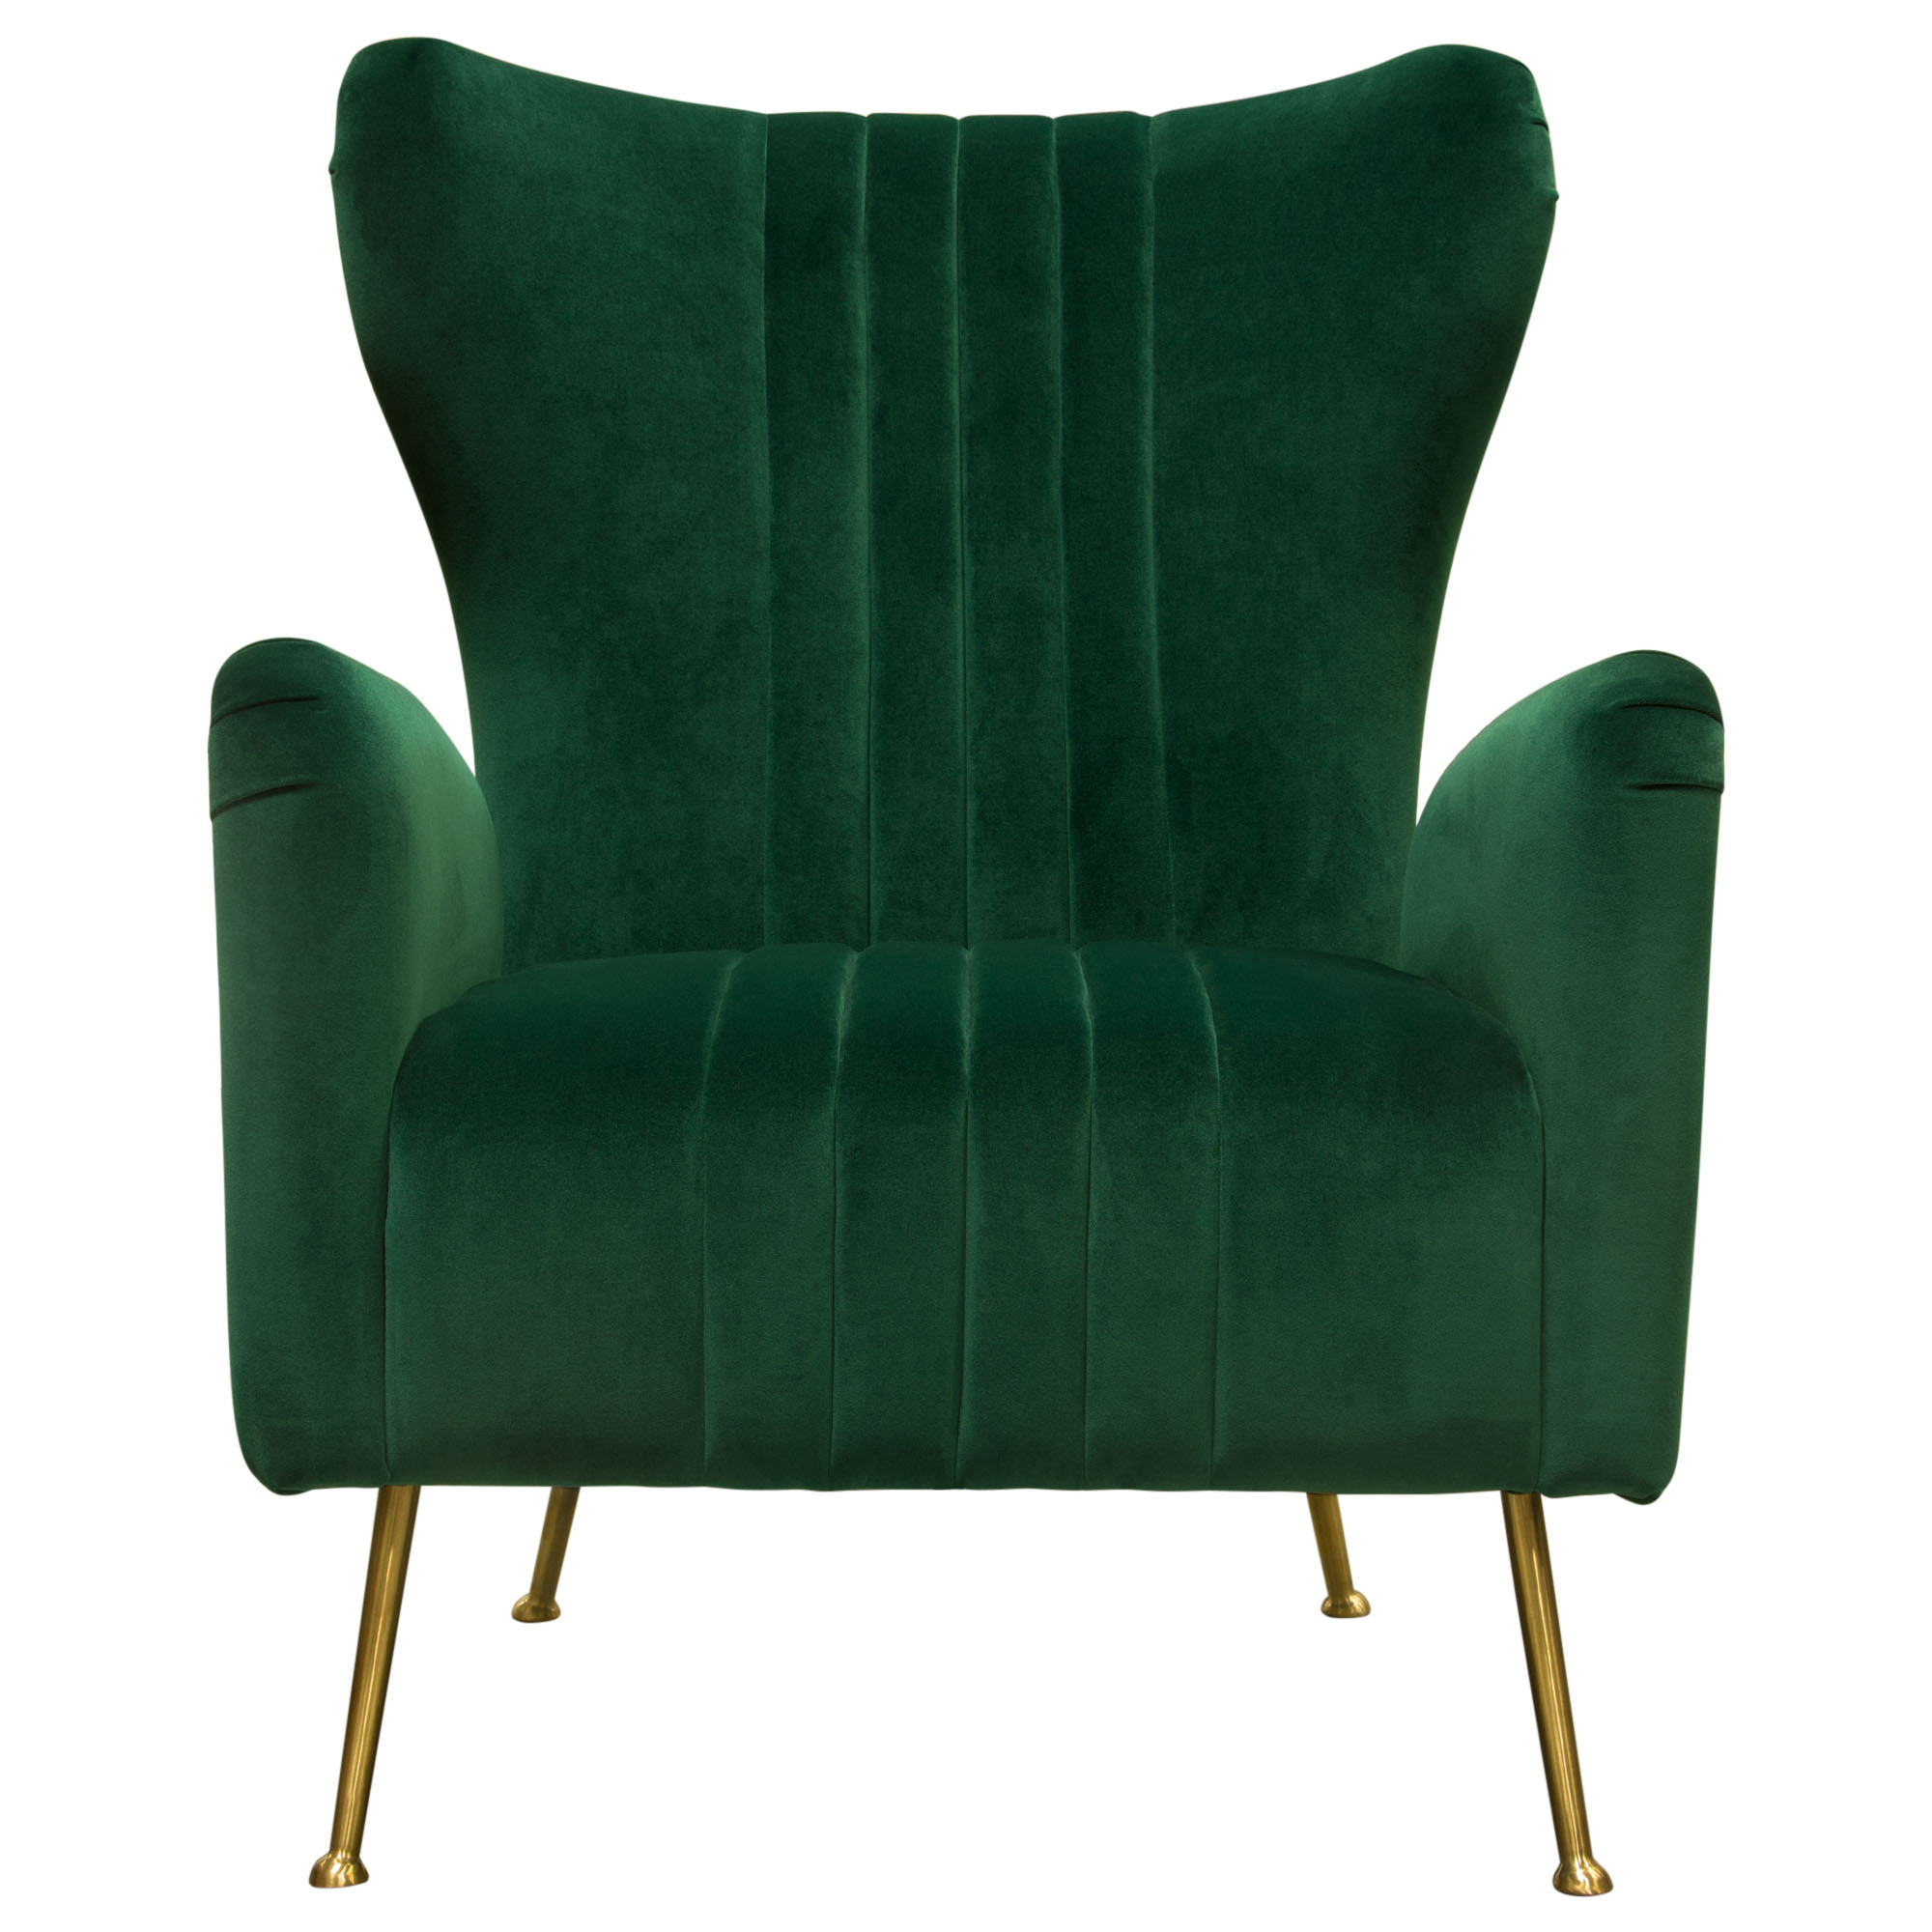 Avalon Chair (Emerald Green) • Lux Lounge EFR (888) 2474411